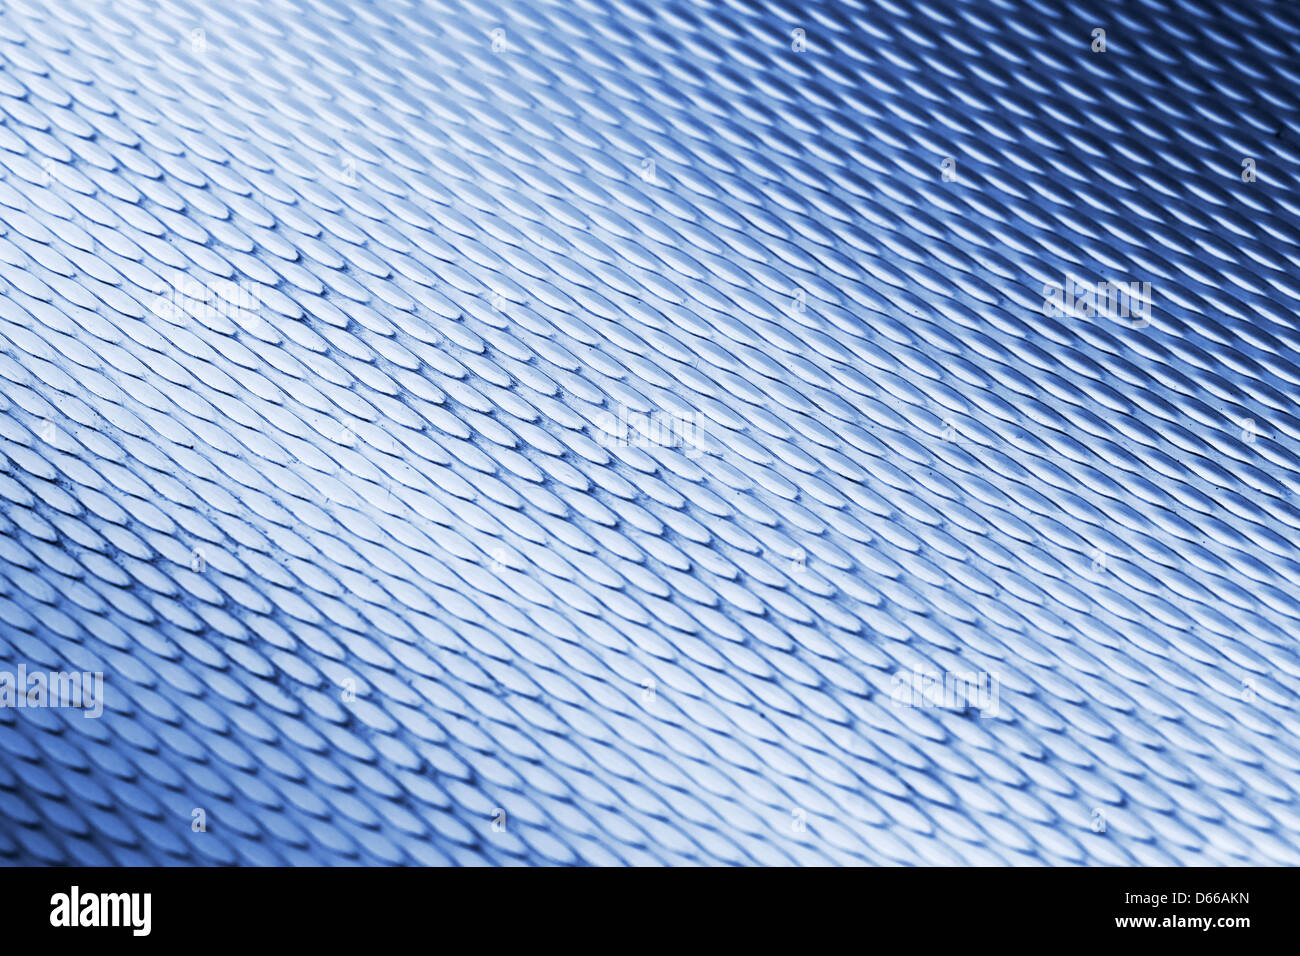 Shining blue metal surface with diamond pattern background texture Stock Photo